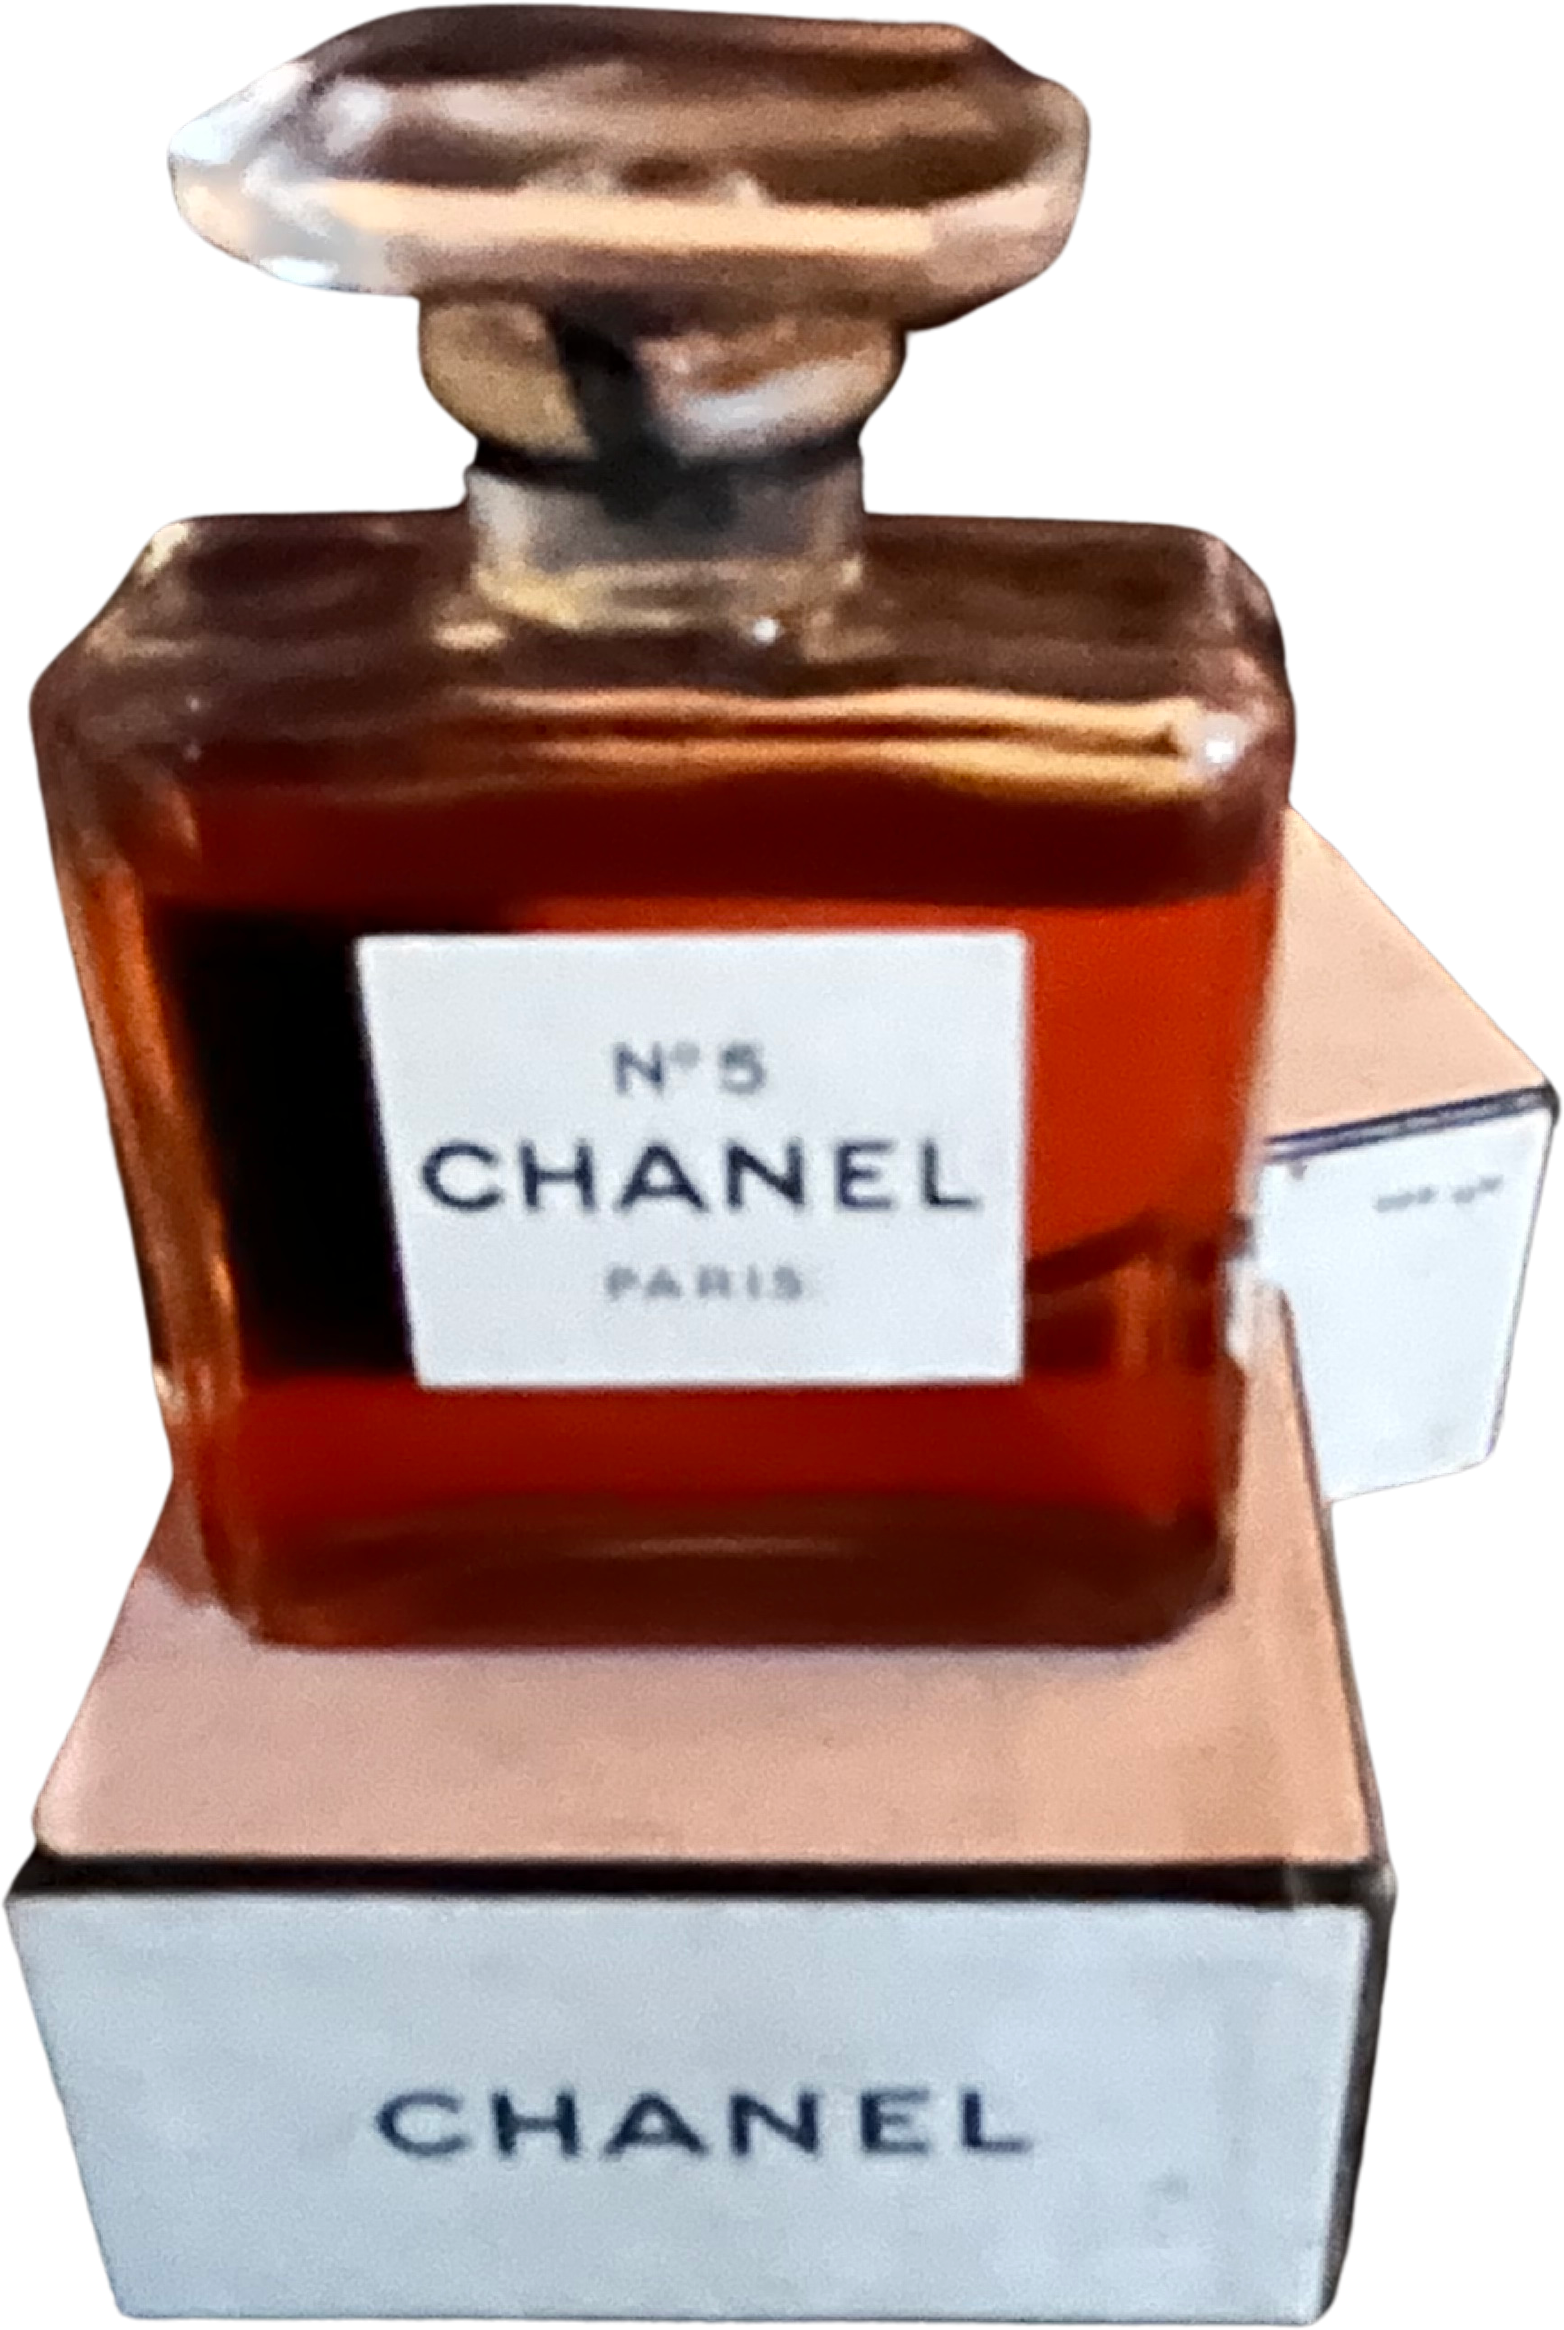 They launched the fragrance Now CHANEL snaps up La Pausa, the